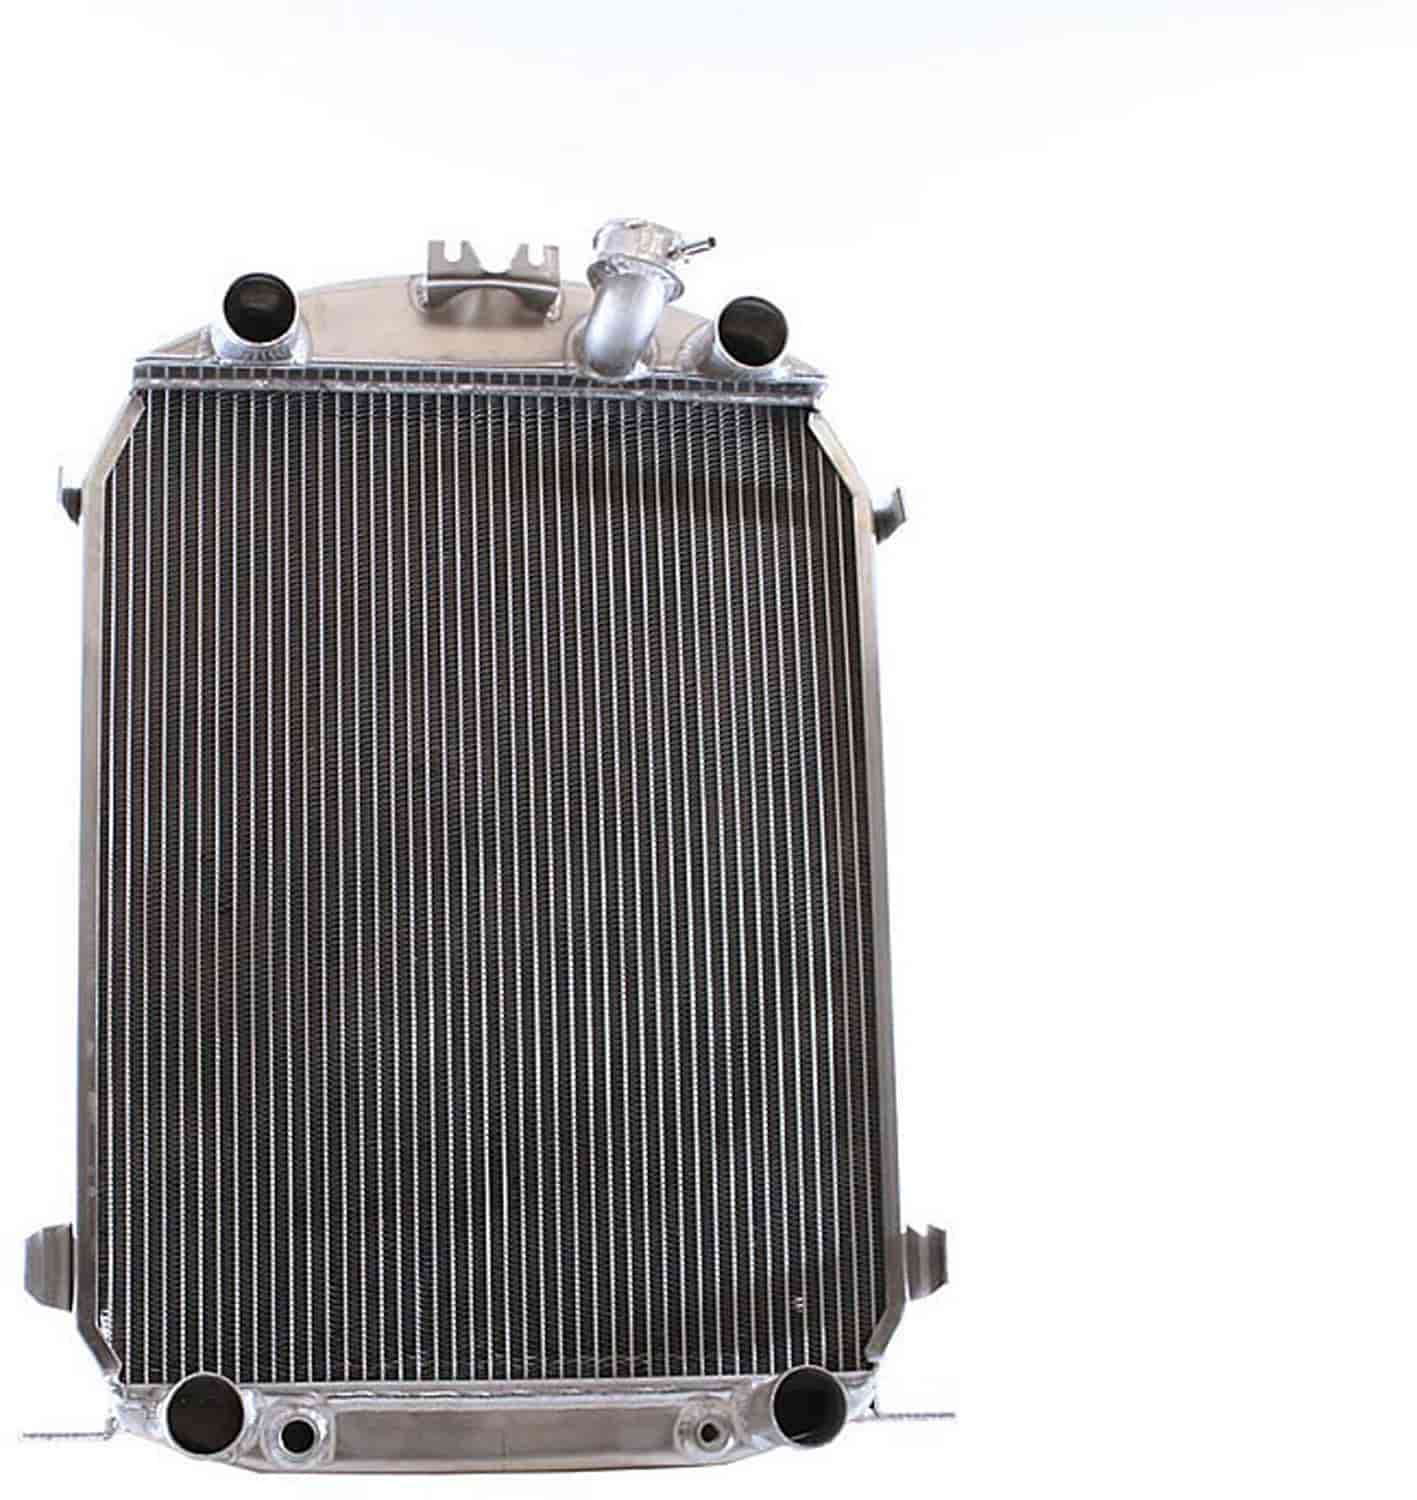 ExactFit Radiator for 1930-1931 Model A with Early Ford Flathead V8 and Hood Rod Bracket